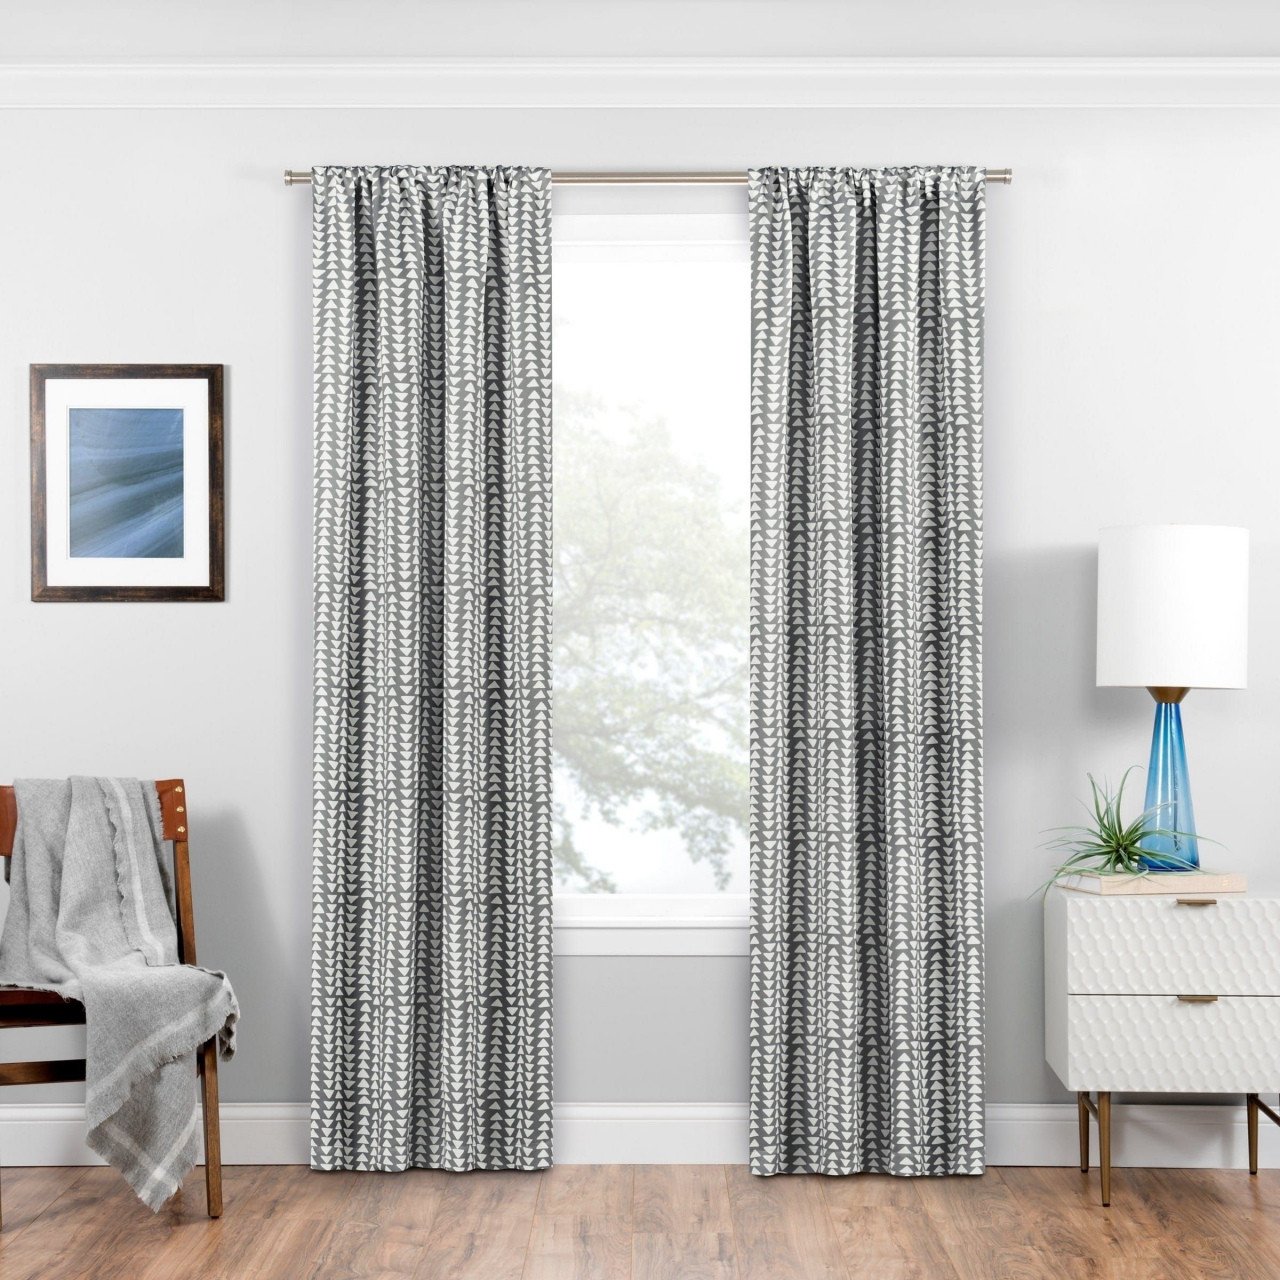 Bedroom Curtains at Walmart New Coral Bedroom Curtains — Procura Home Blog